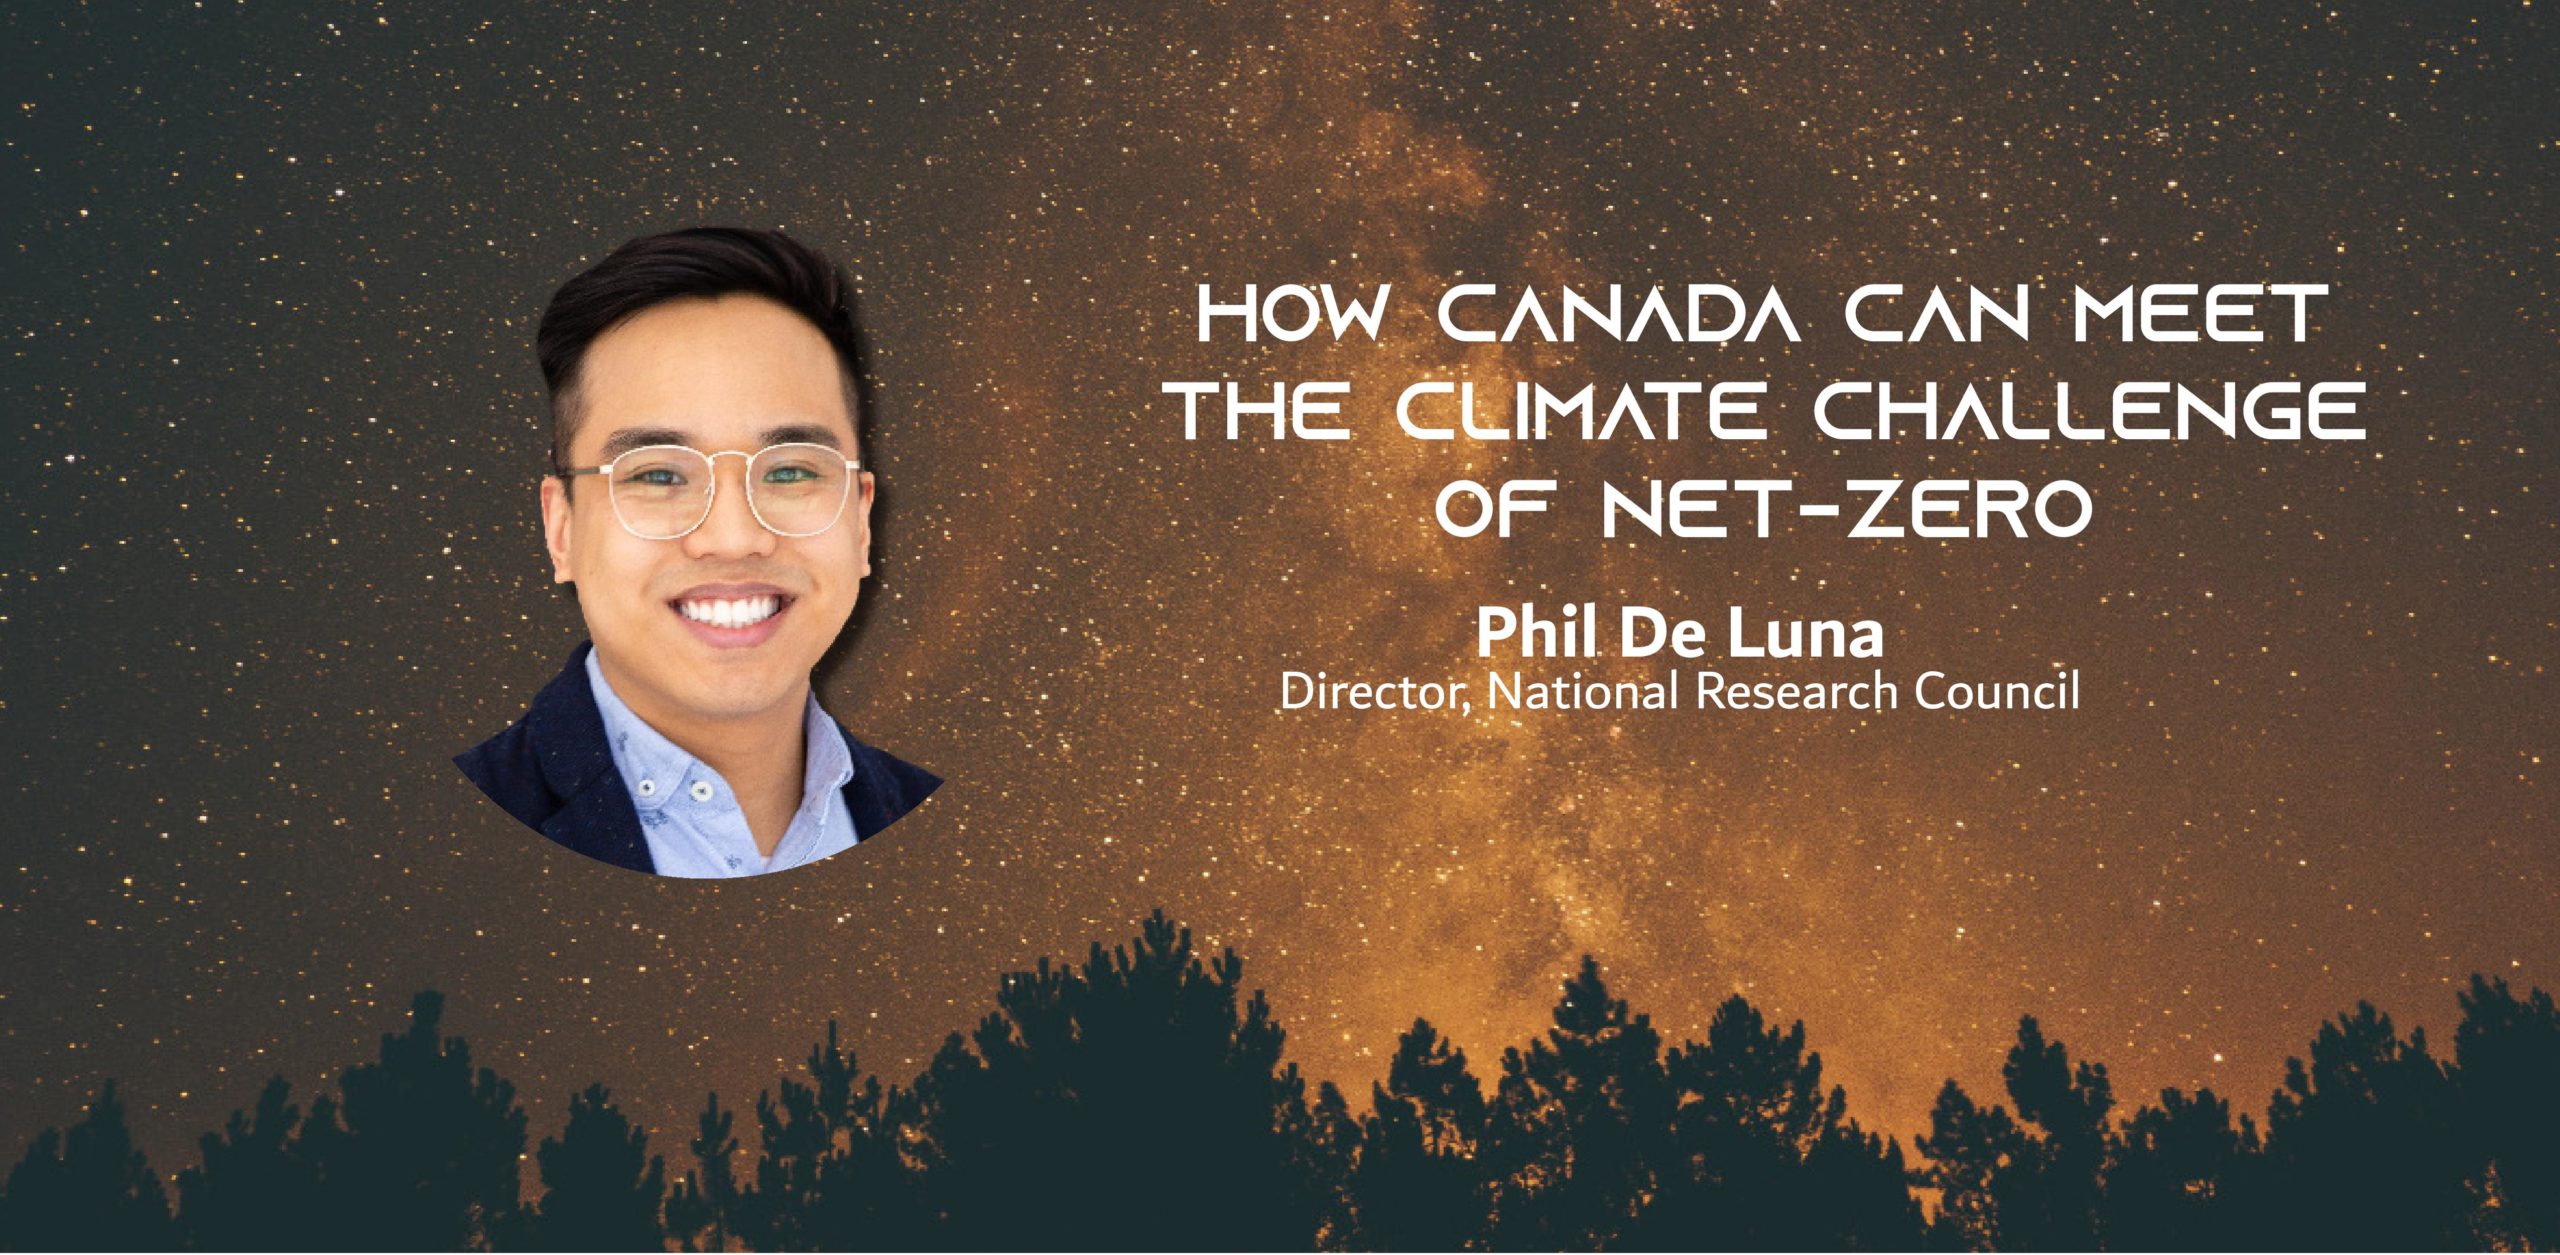 Photo of an Asian man on a night sky with the text: How Canada Can Meet the Climate Challenge of Net-Zero Phil De Luna Director, National Research Council